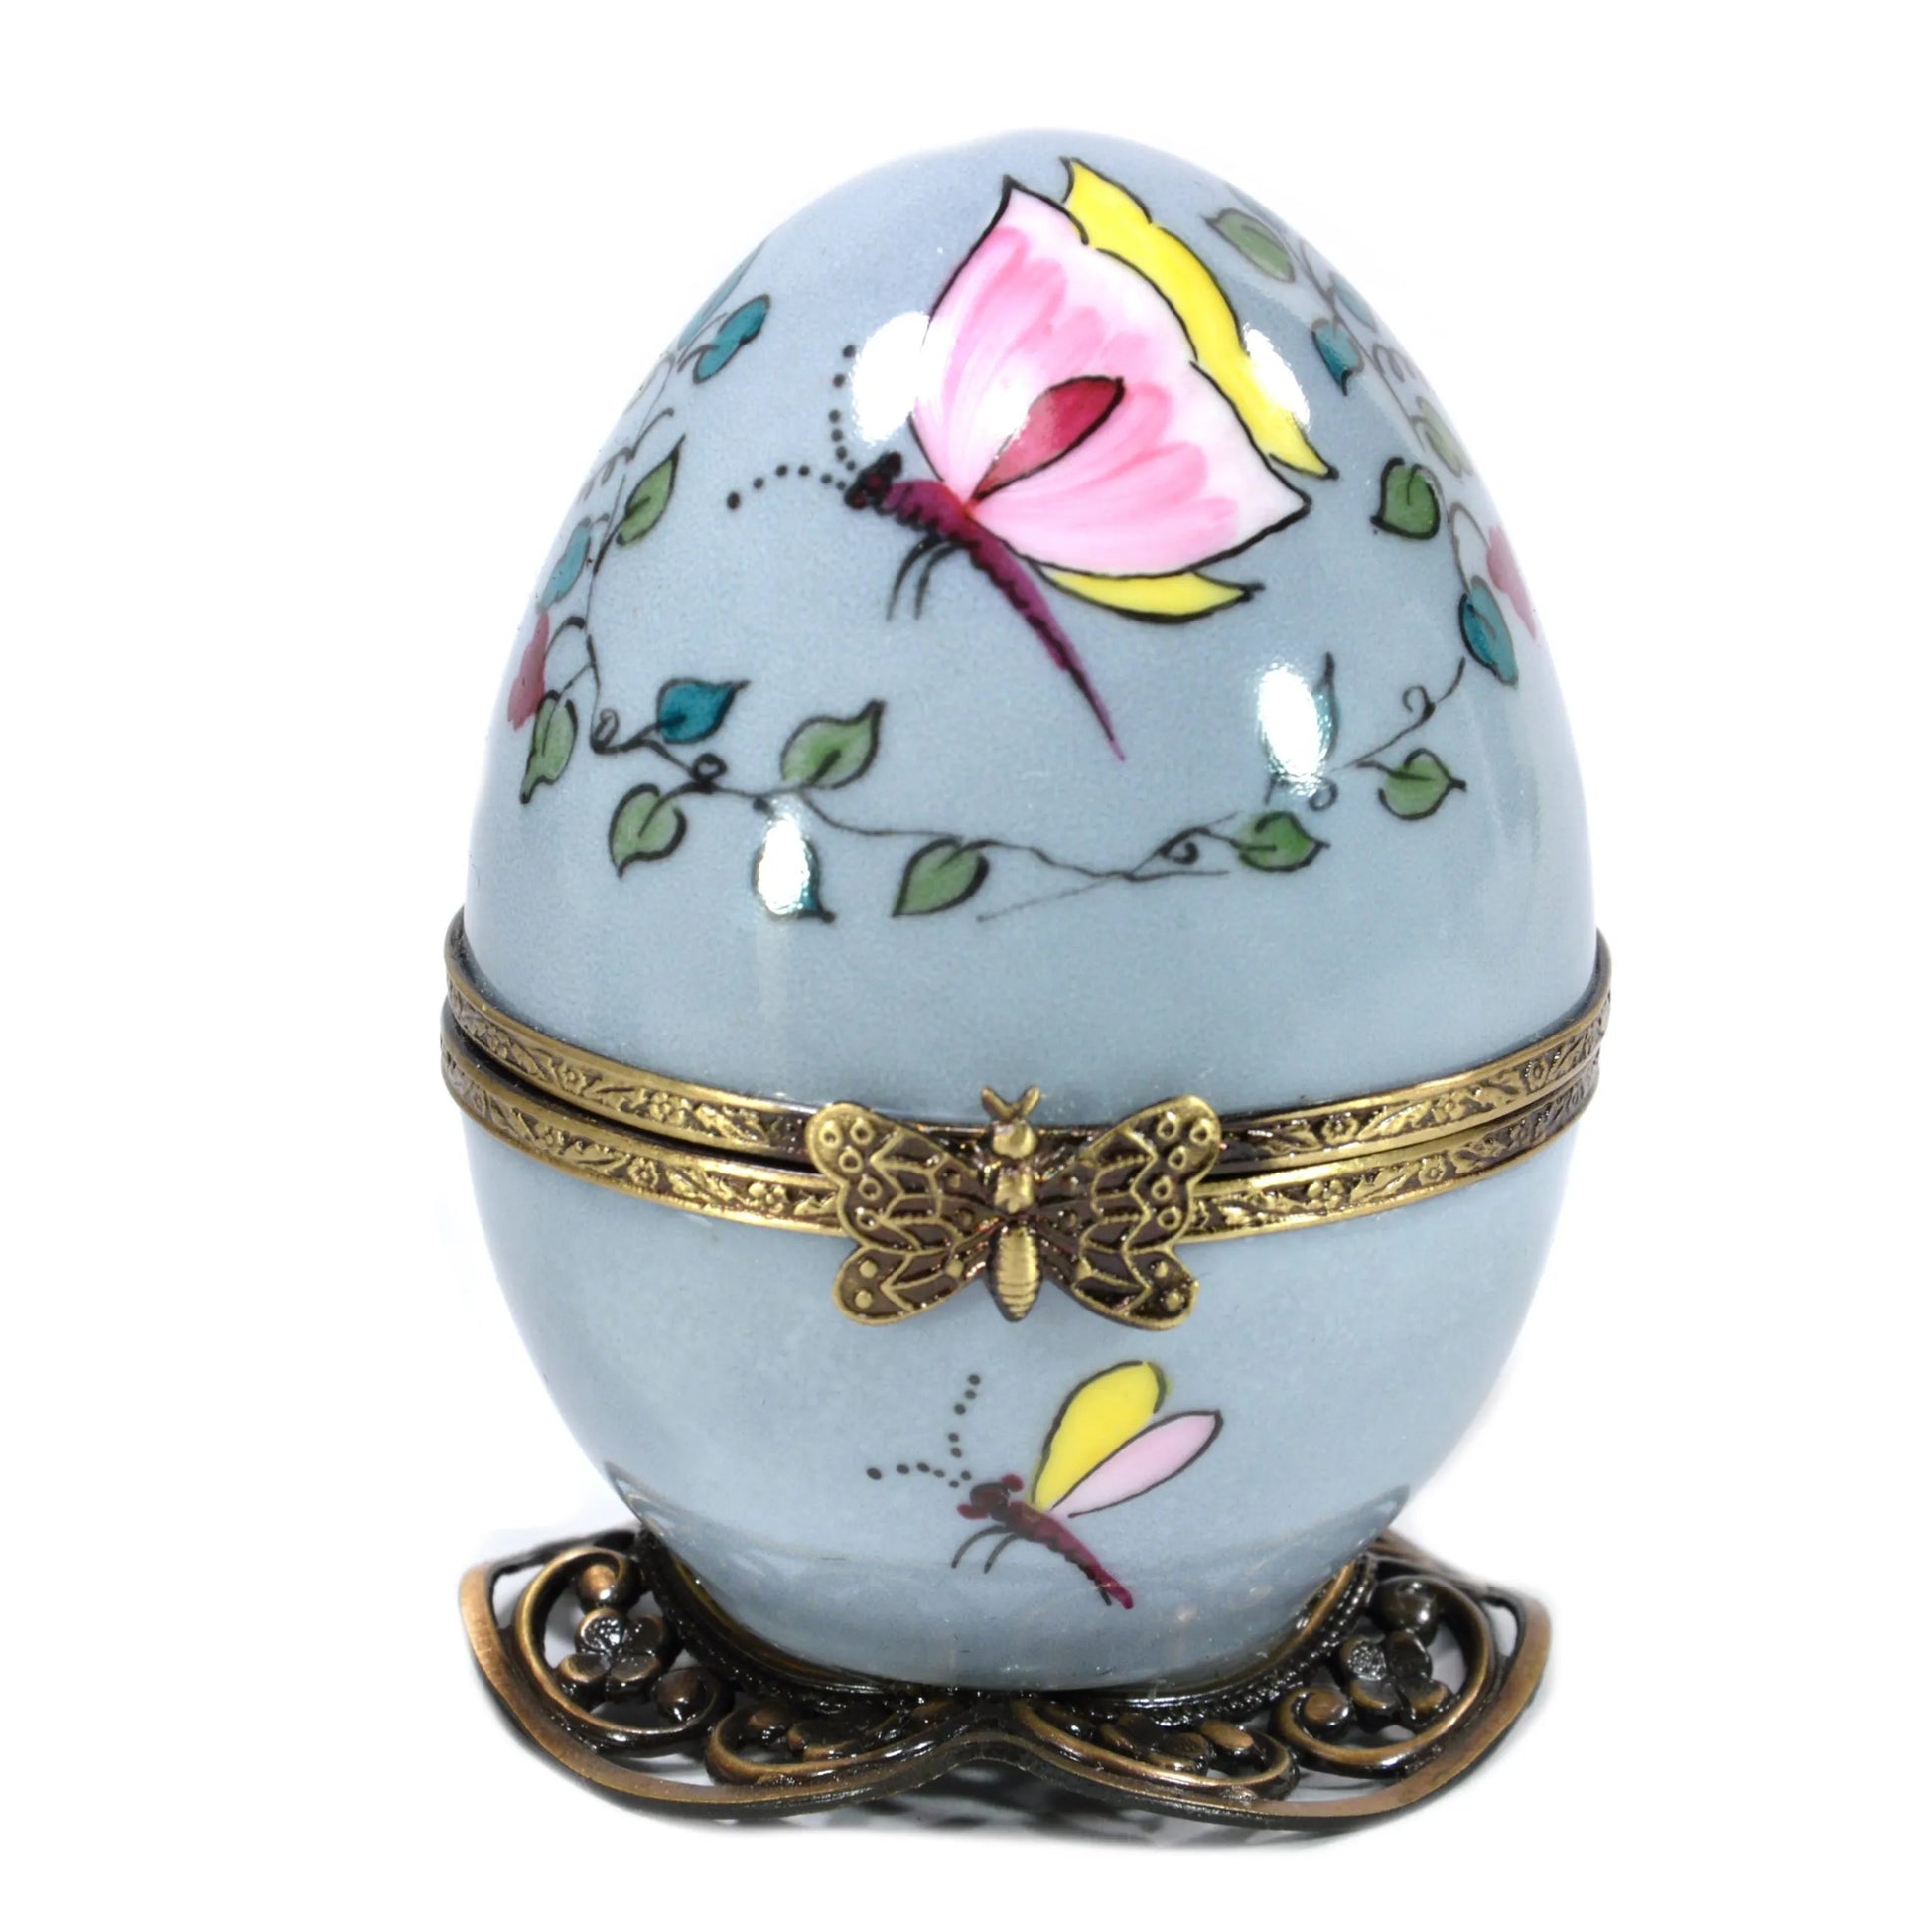 Gray musical egg with gray shoes - LAZADO